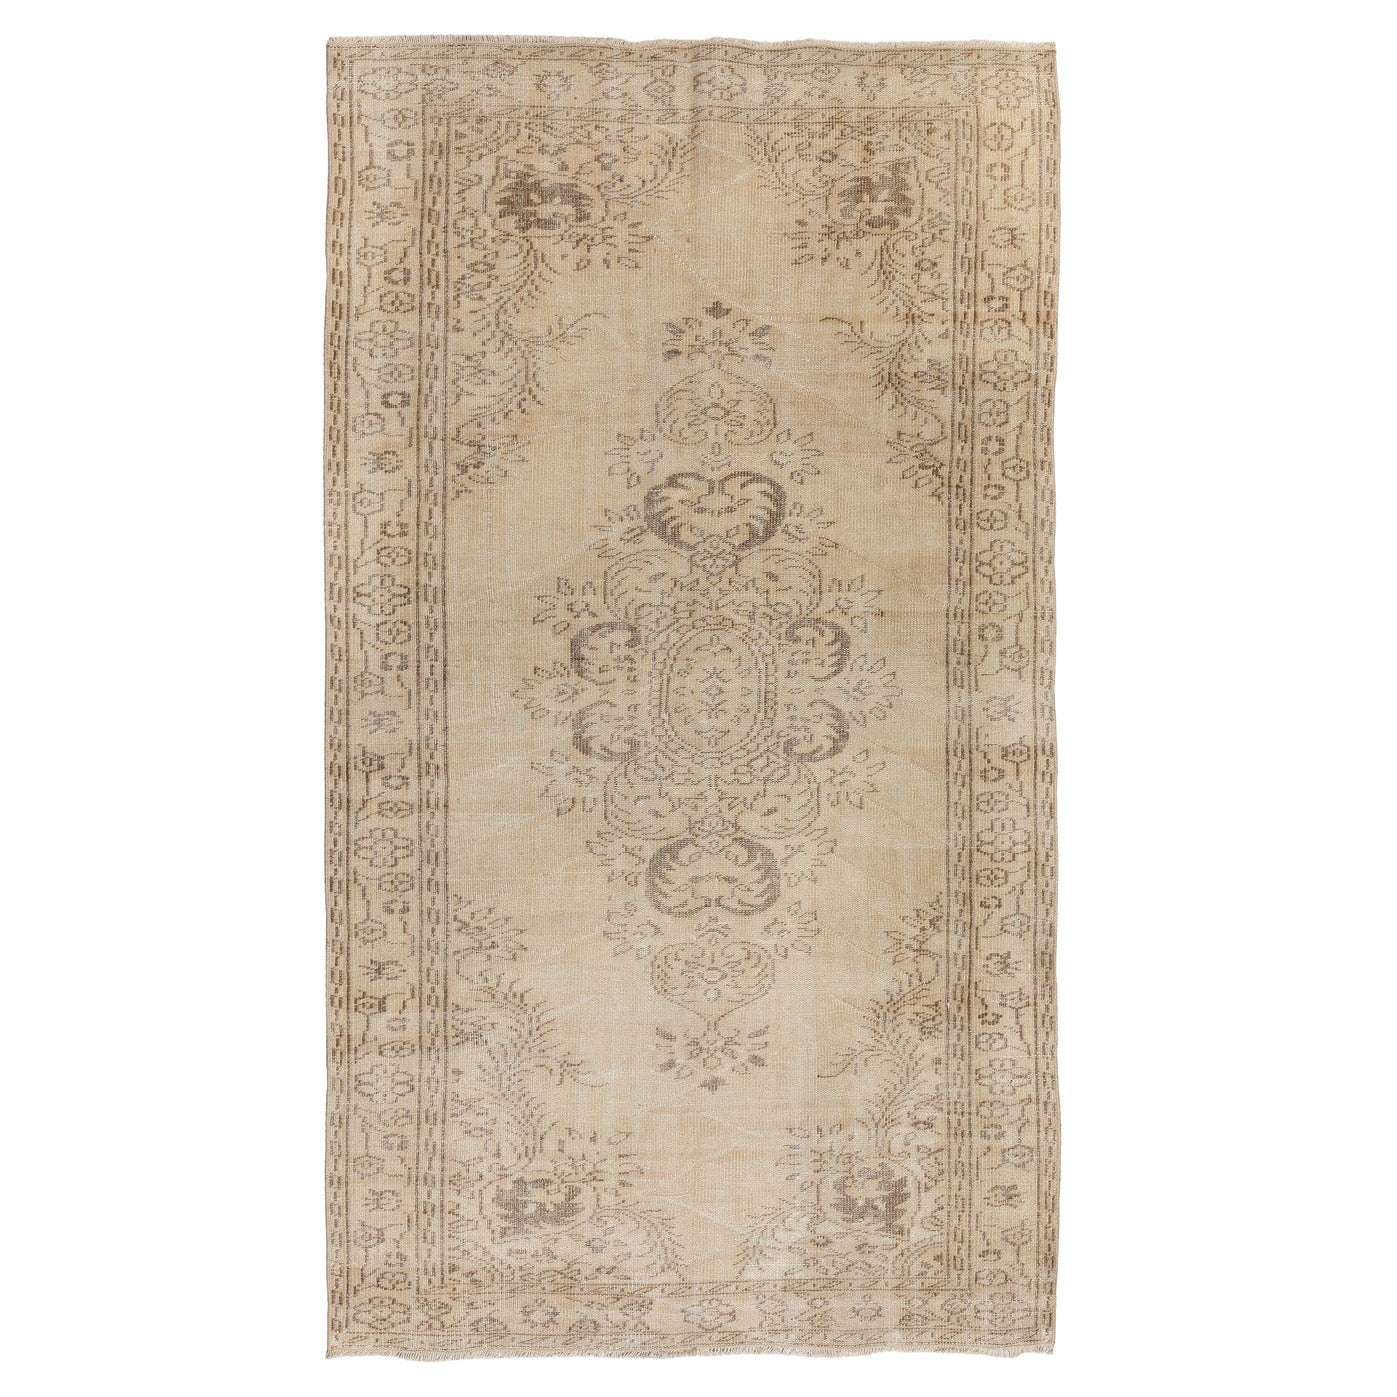 5.3x9.2 Ft Handmade Vintage Area Rug in Neutral Colors, Faded Anatolian Carpet For Sale